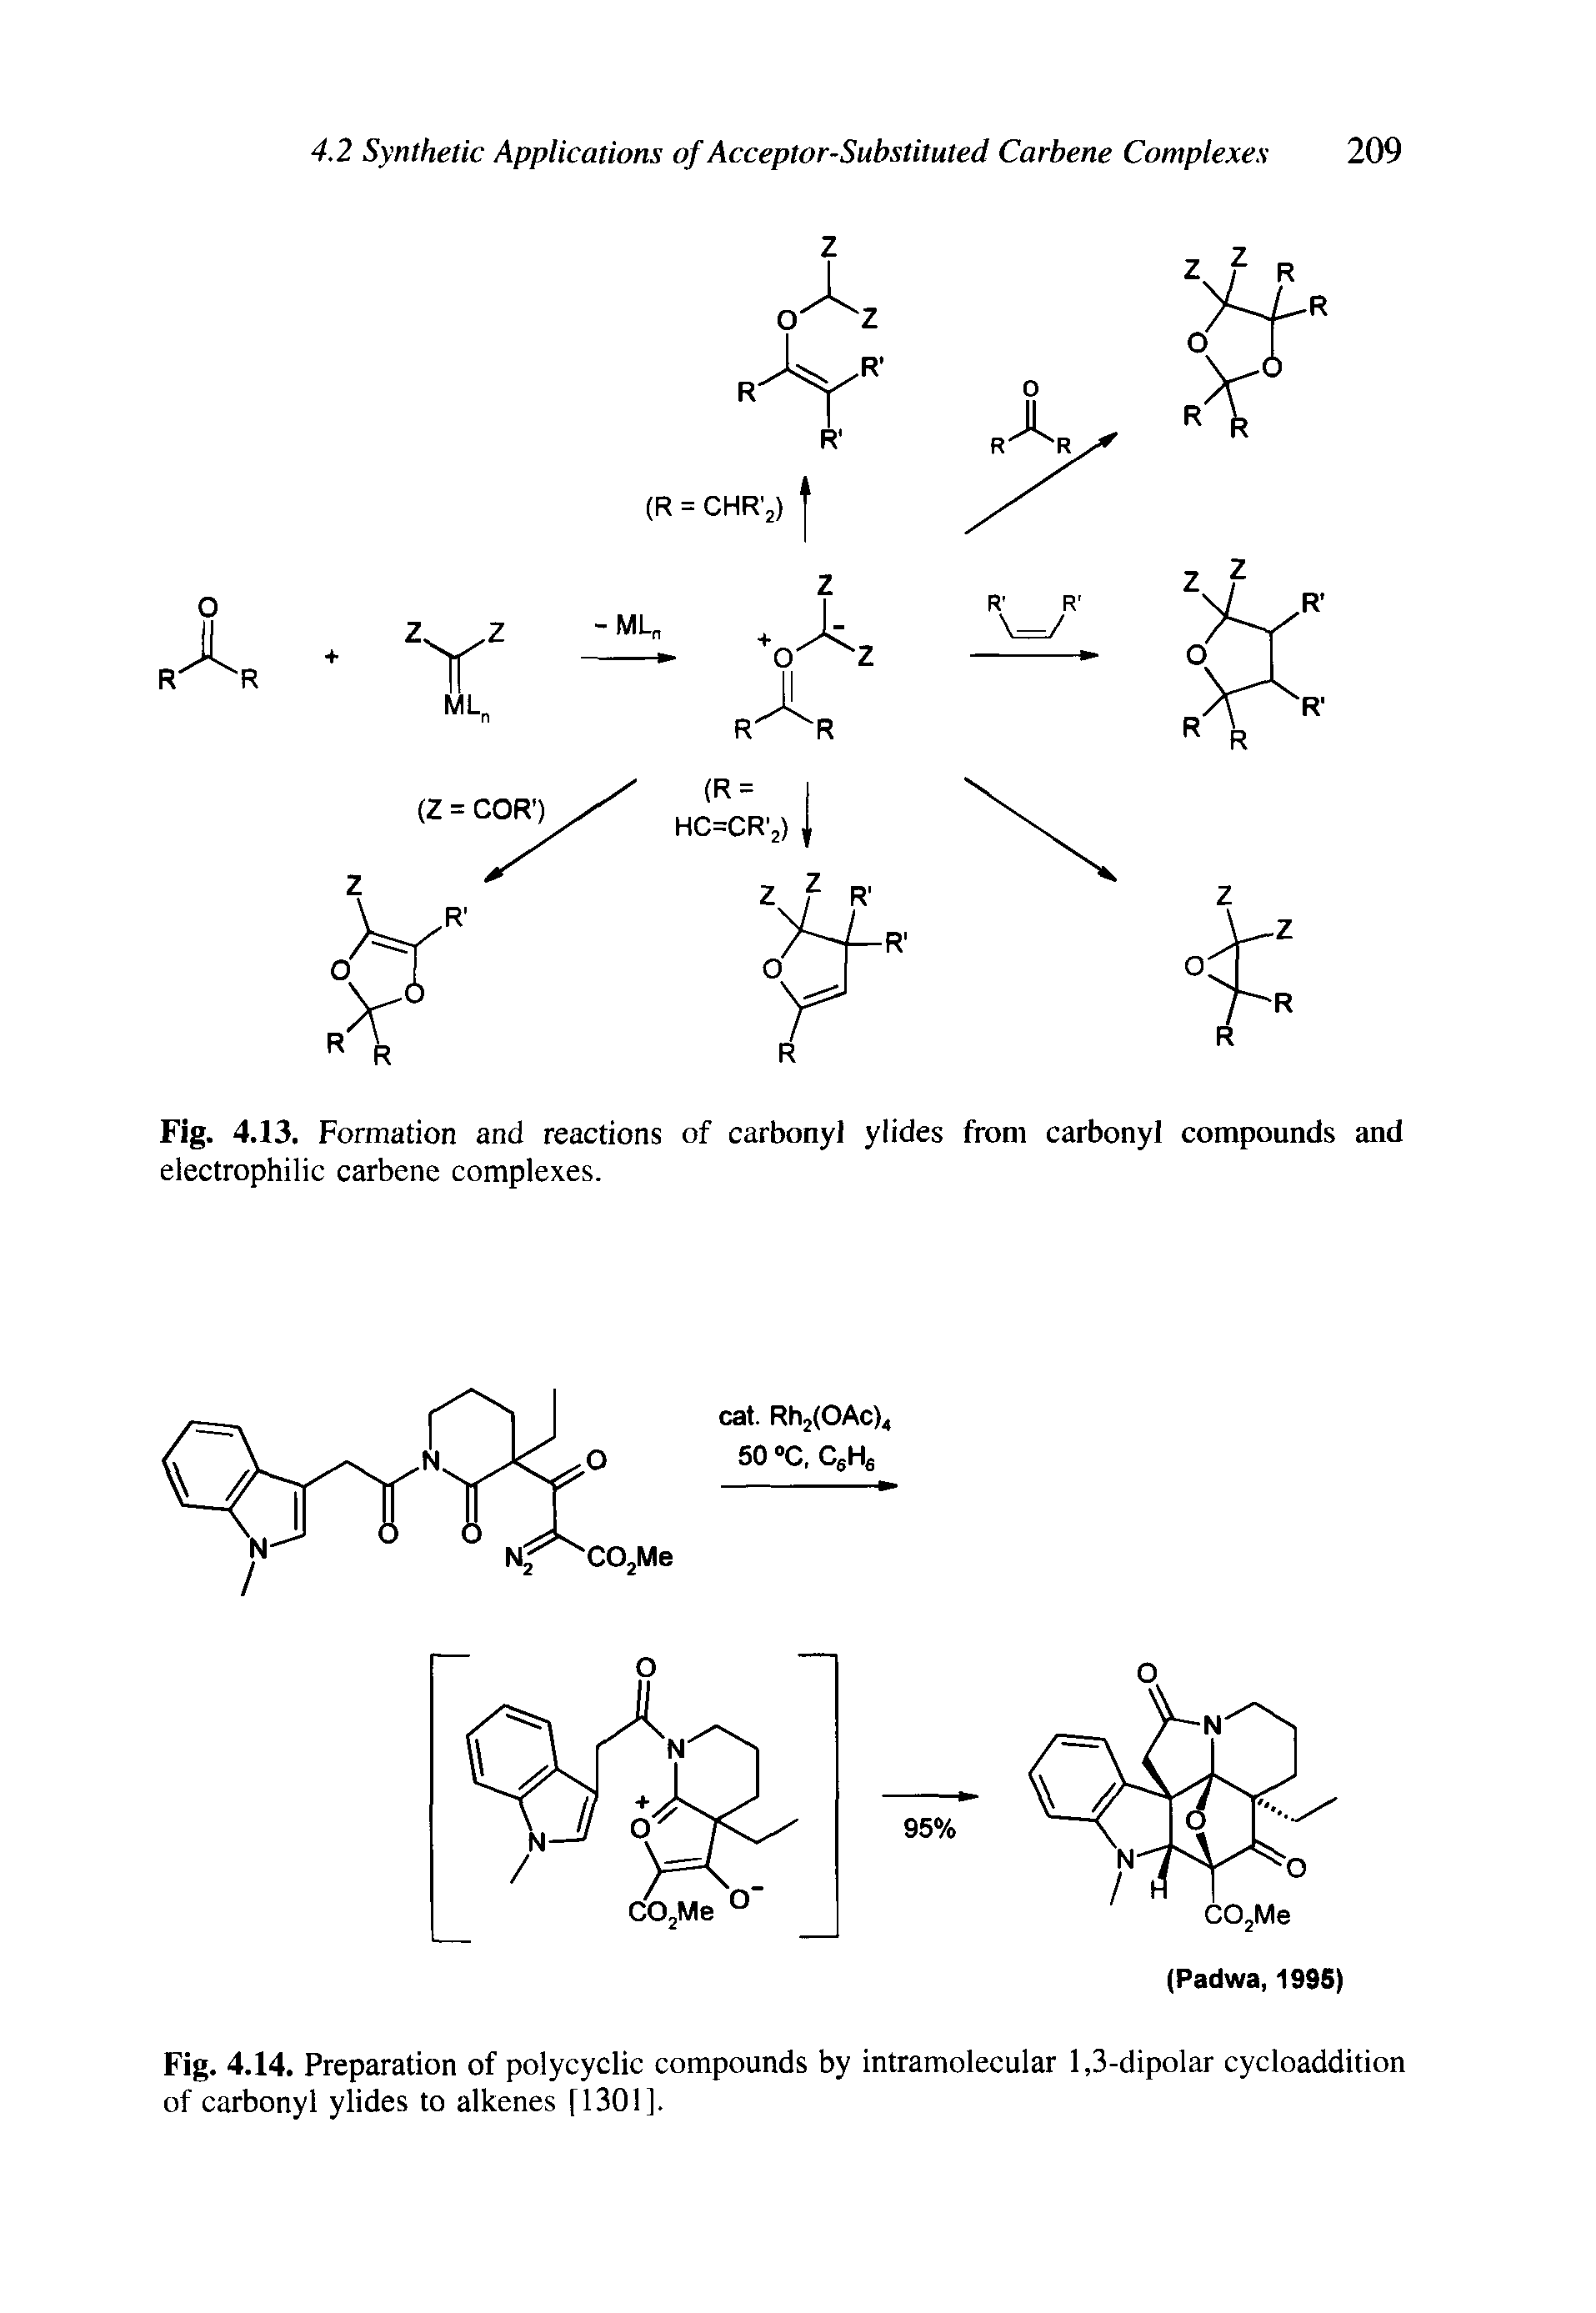 Fig. 4.13. Formation and reactions of carbonyl ylides from carbonyl compounds and electrophilic carbene complexes.